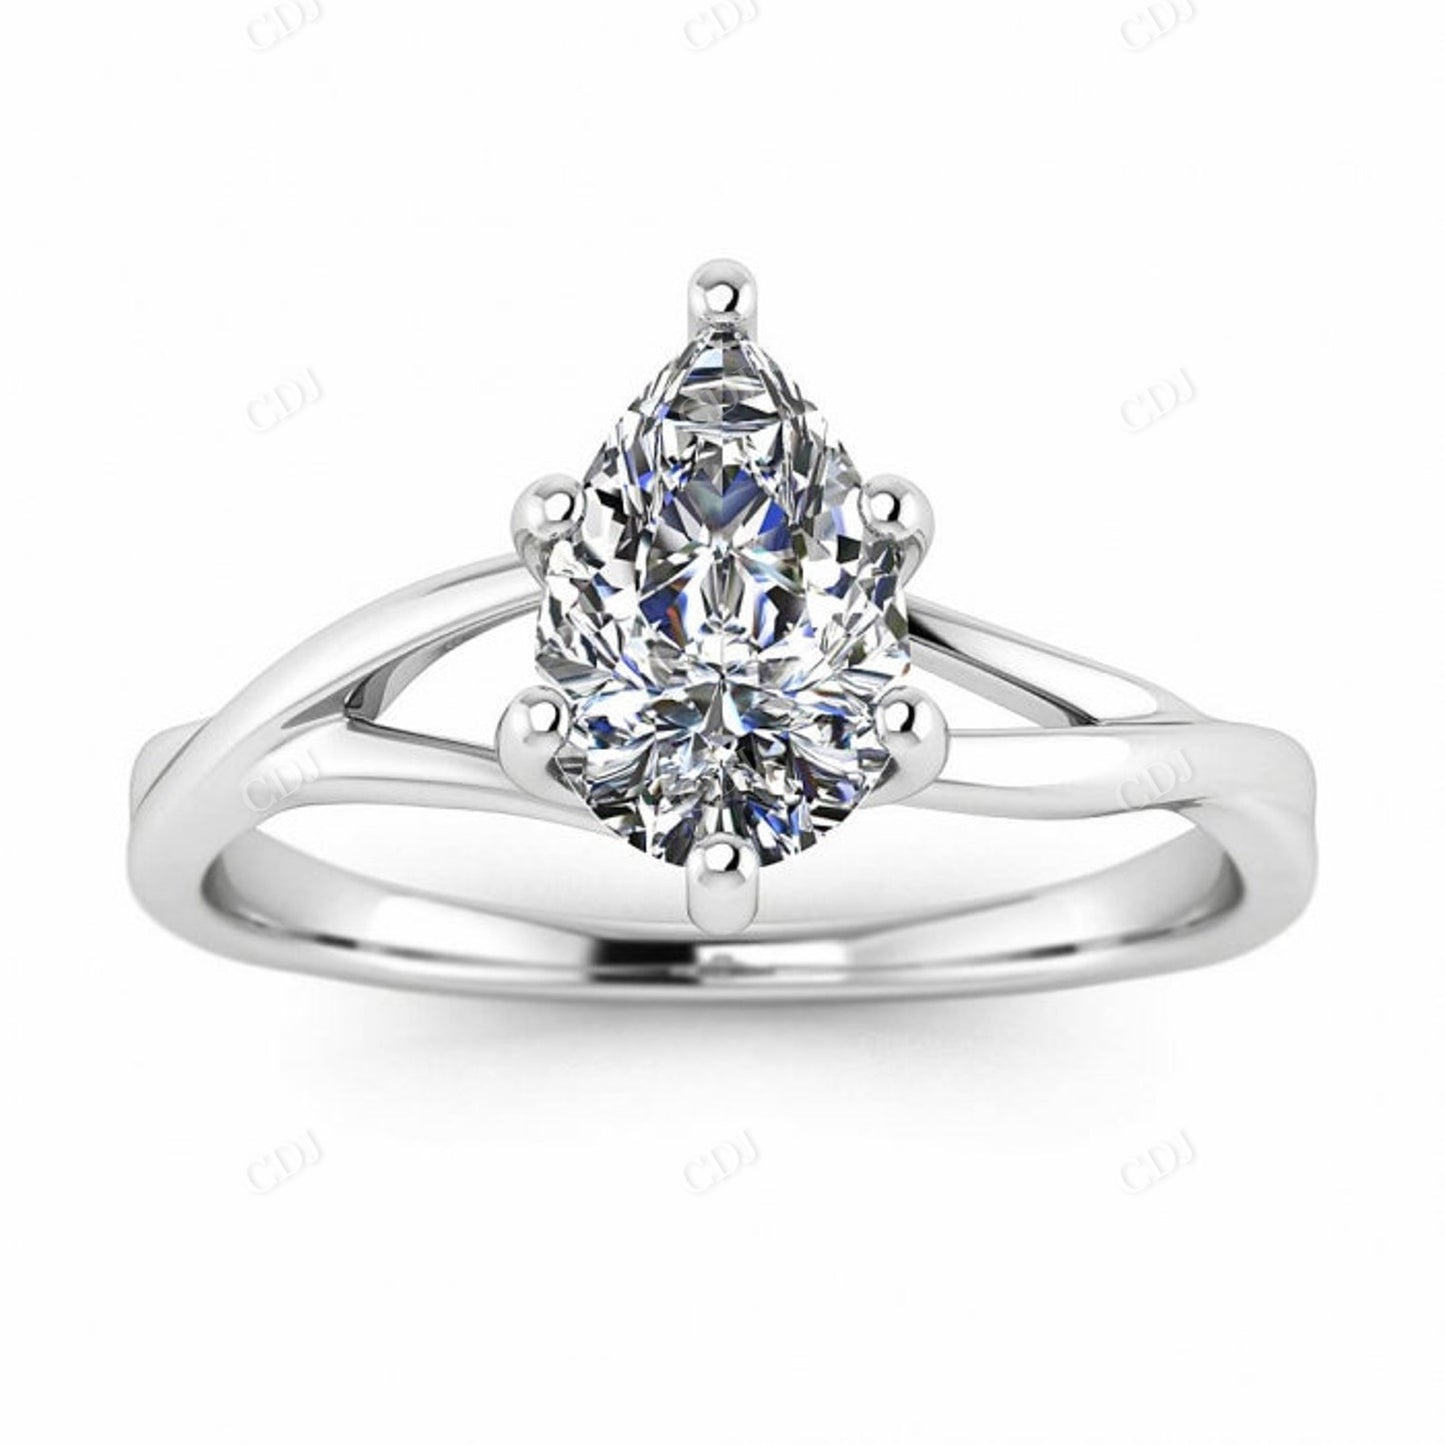 White Gold Twisted Band Pear Shaped Moissanite Engagement Ring